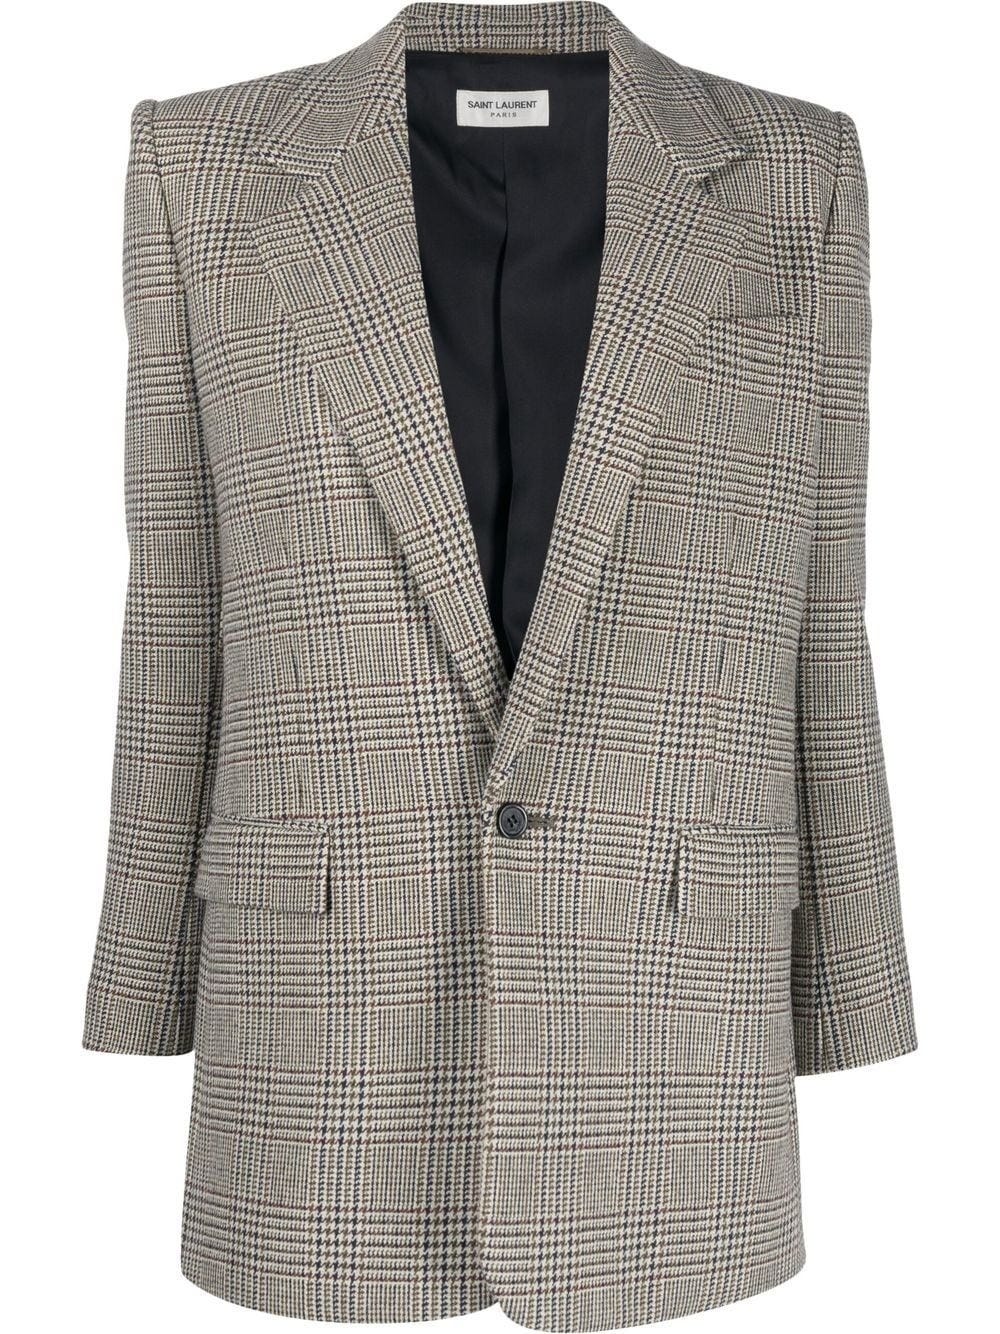 SAINT LAURENT HOUNDSTOOTH SINGLE-BREASTED BUTTONED BLAZER